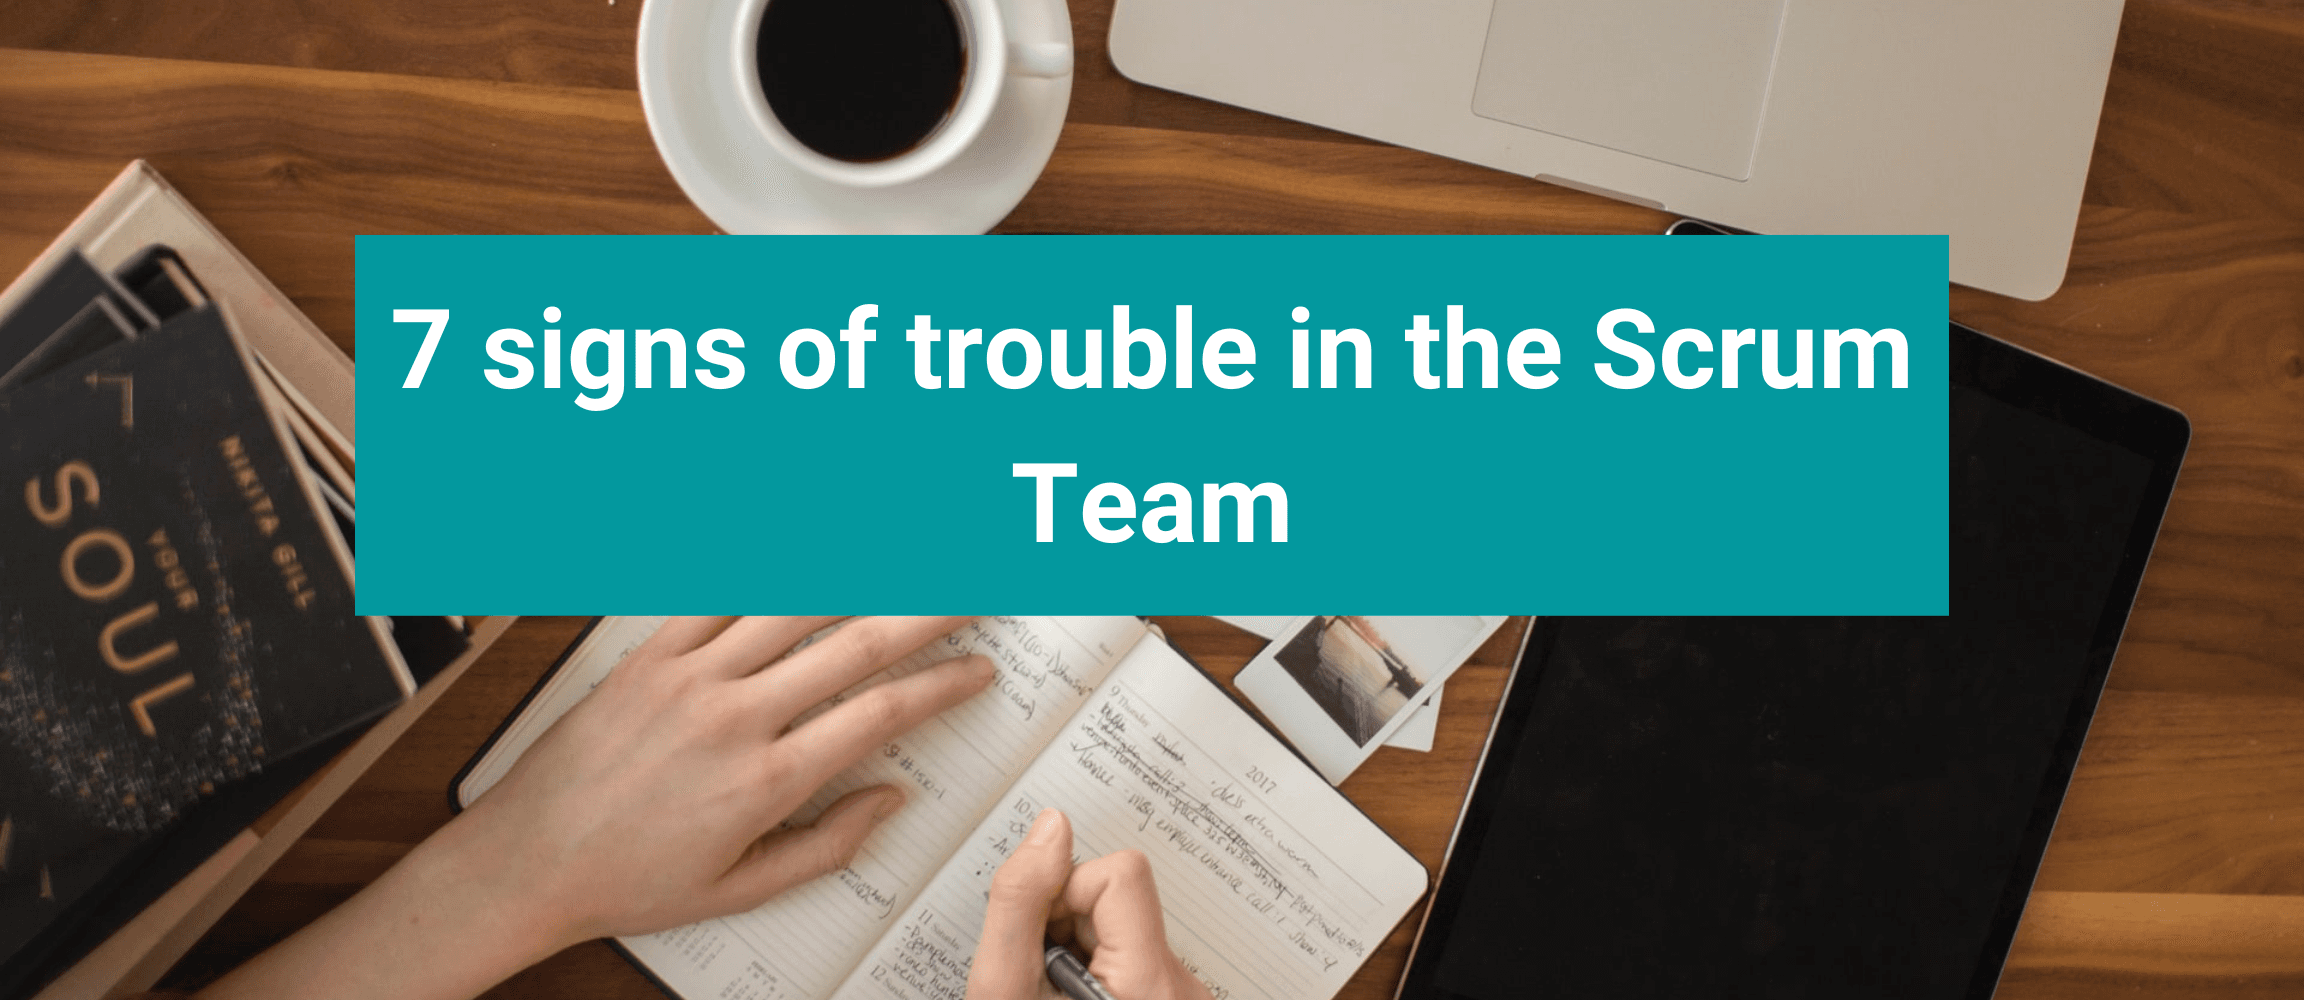 7 signs of trouble in the Scrum Team